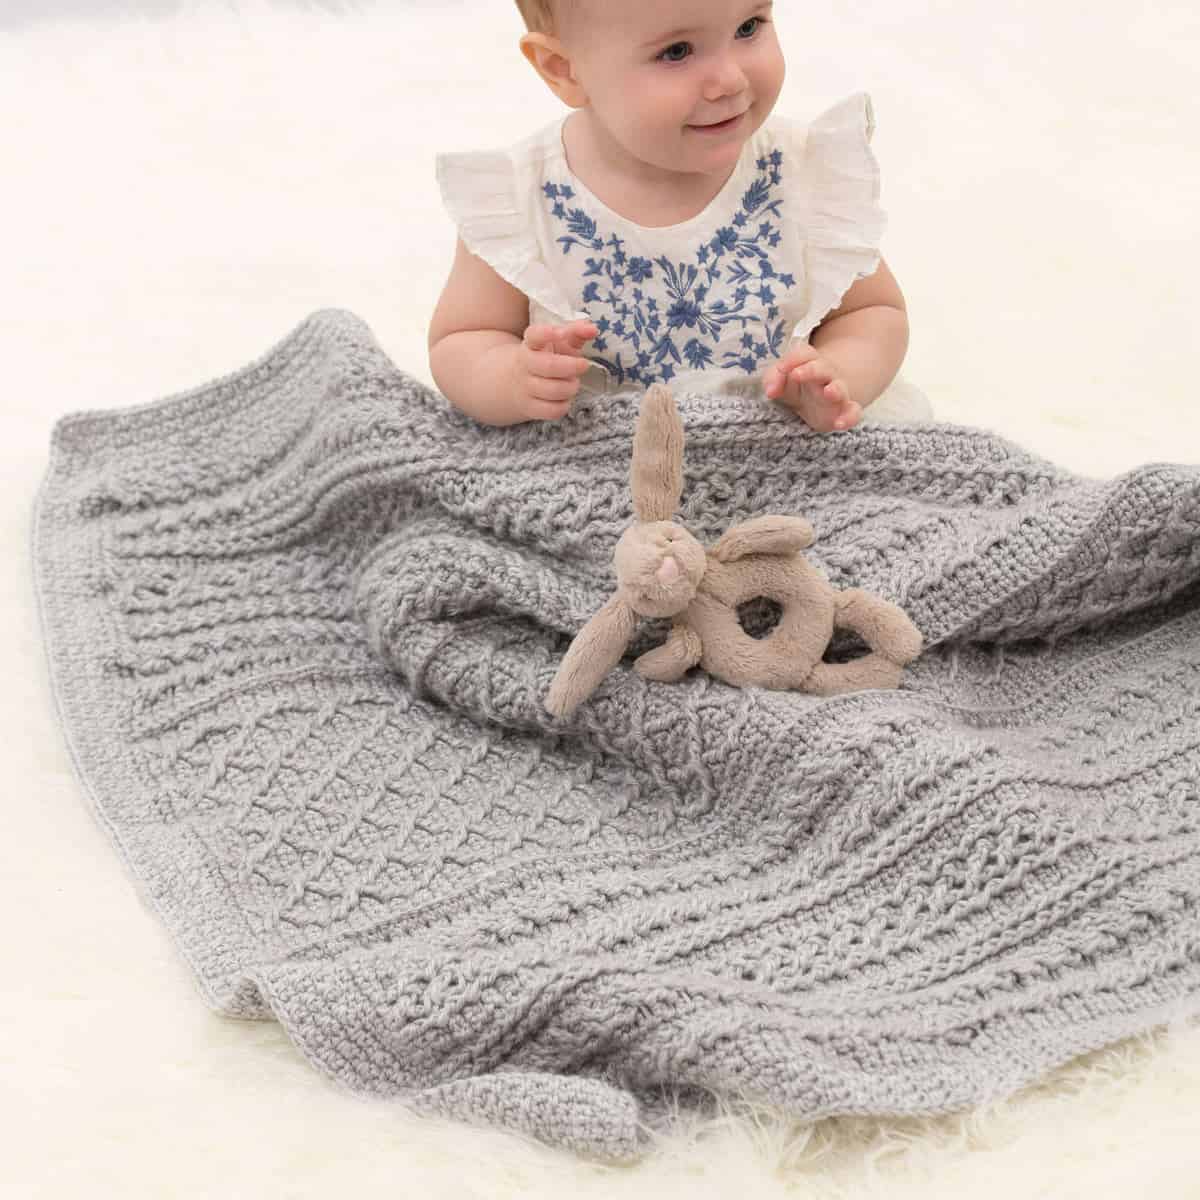 Red Heart Cable Your Love Crochet Blanket Pattern